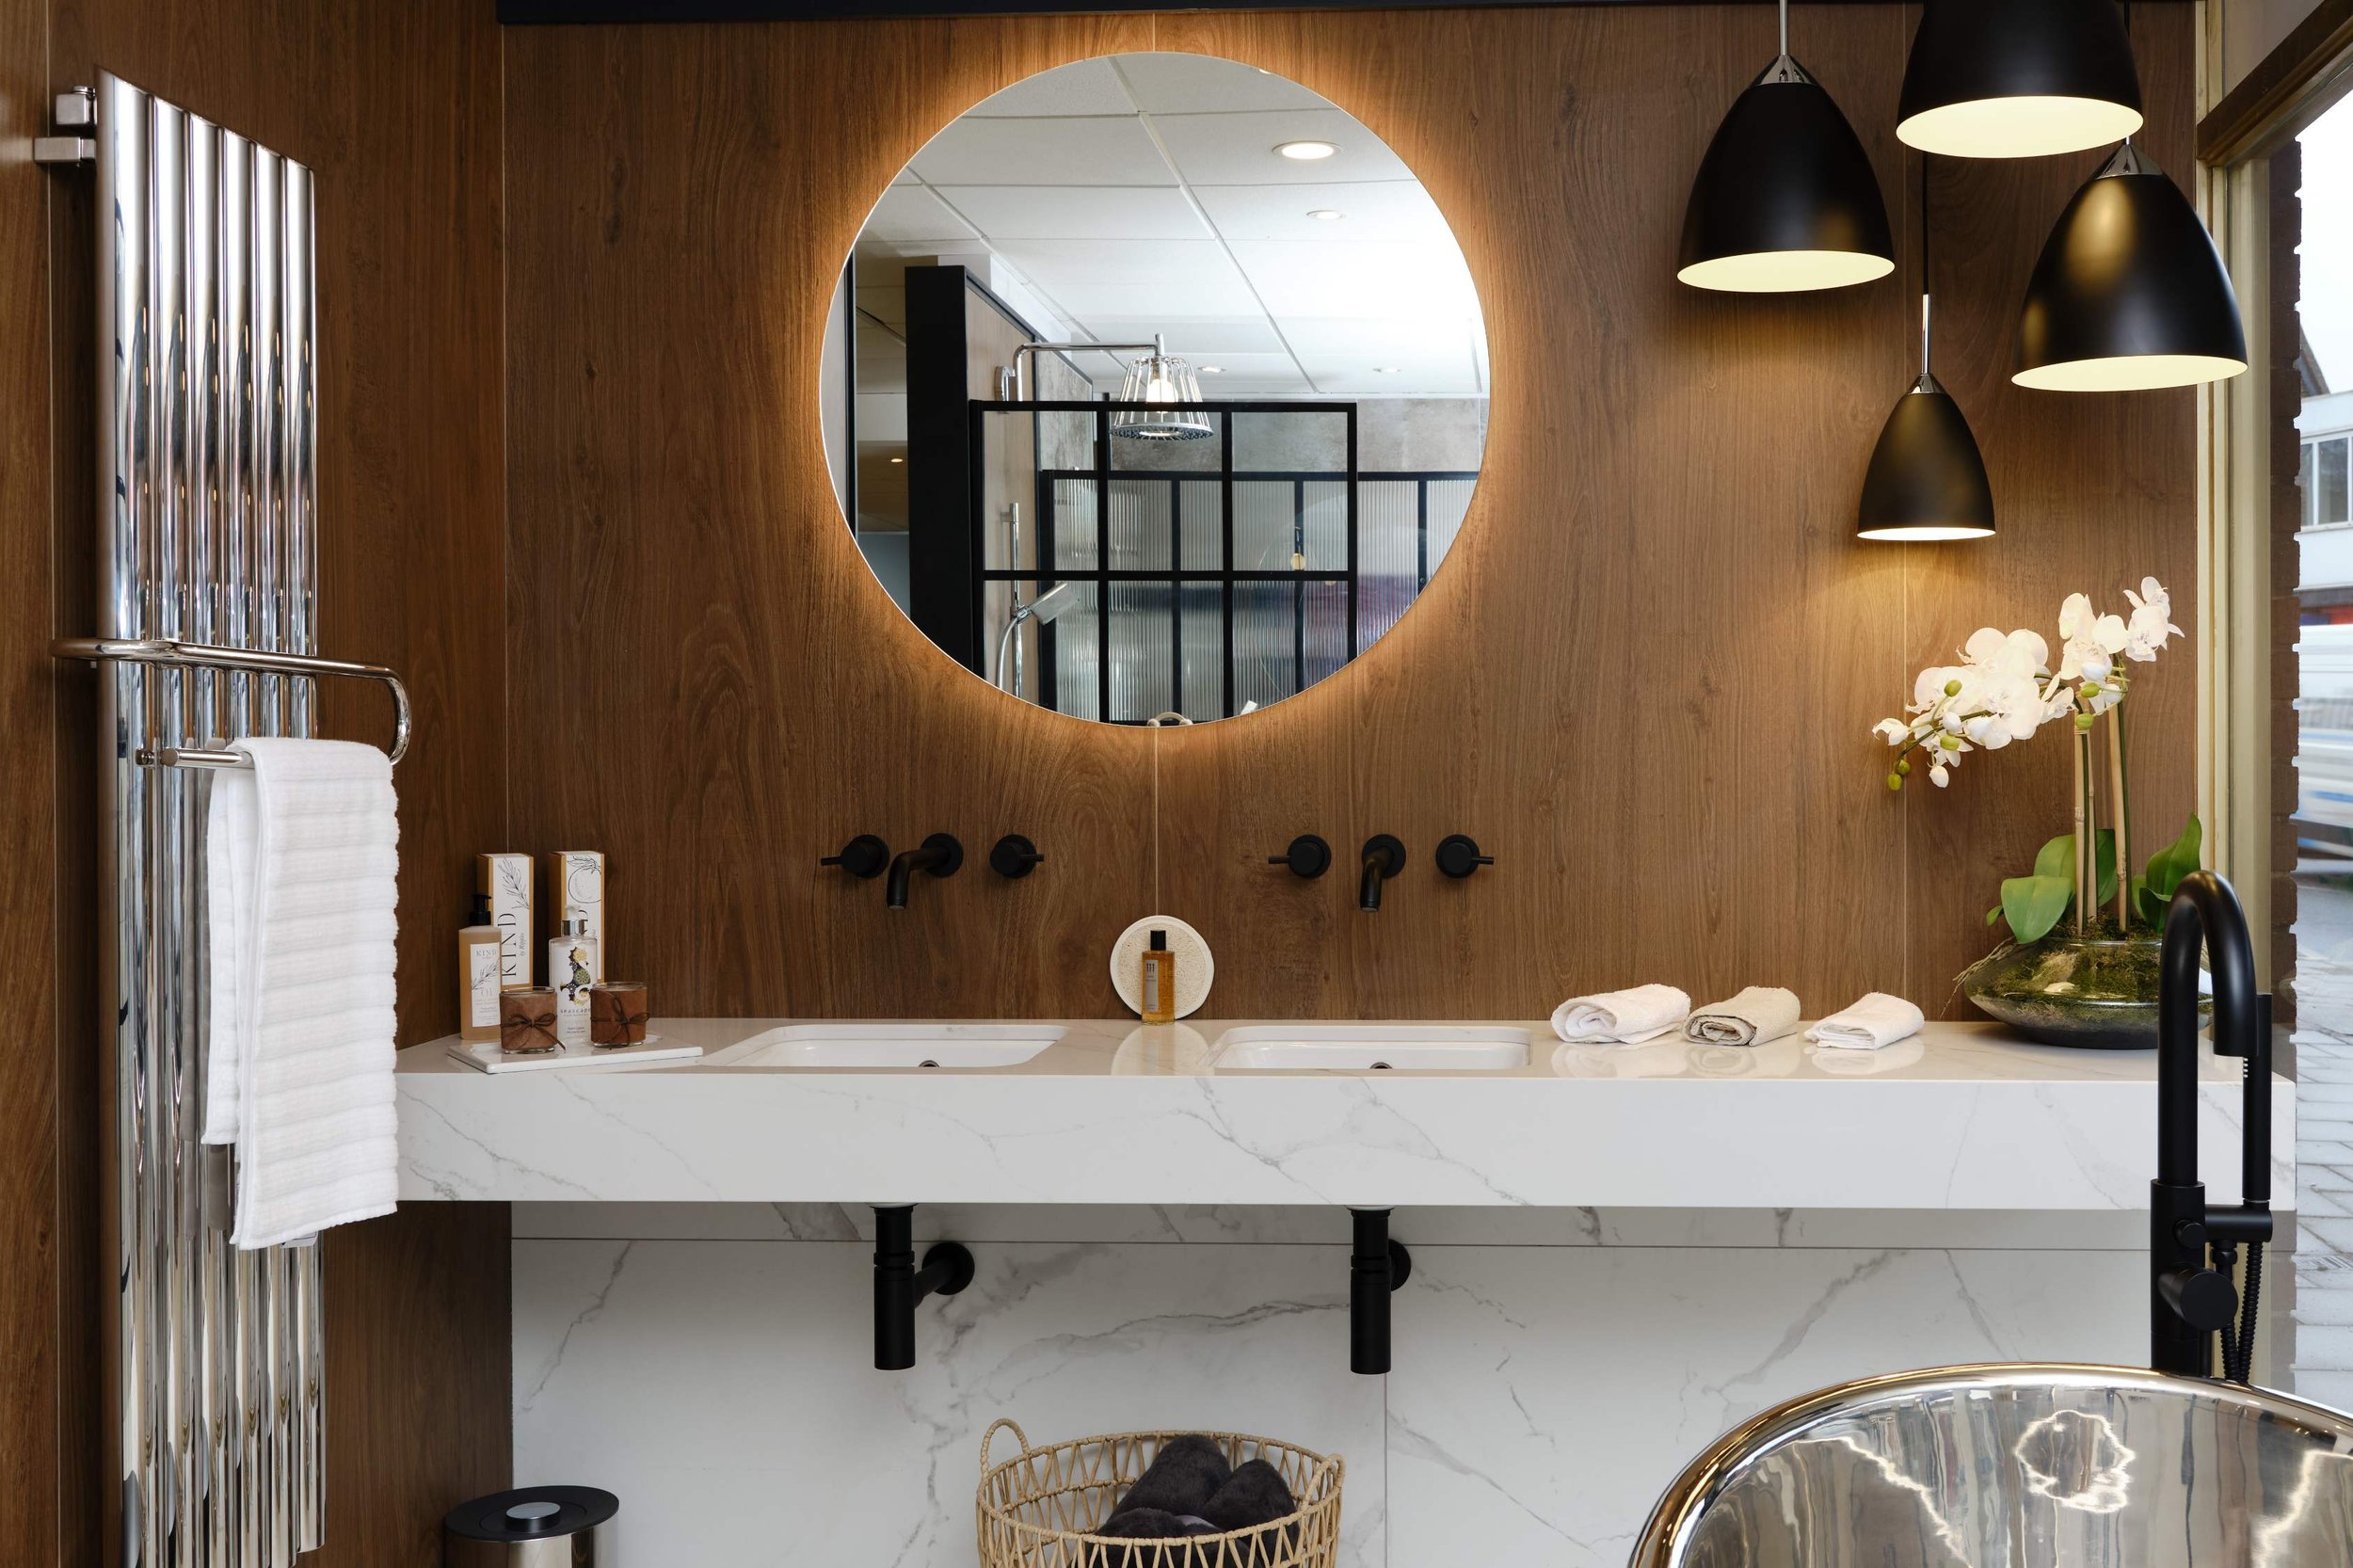 ripples-solihull-showroom-with-wooden-panelling-and-round-mirror.jpg